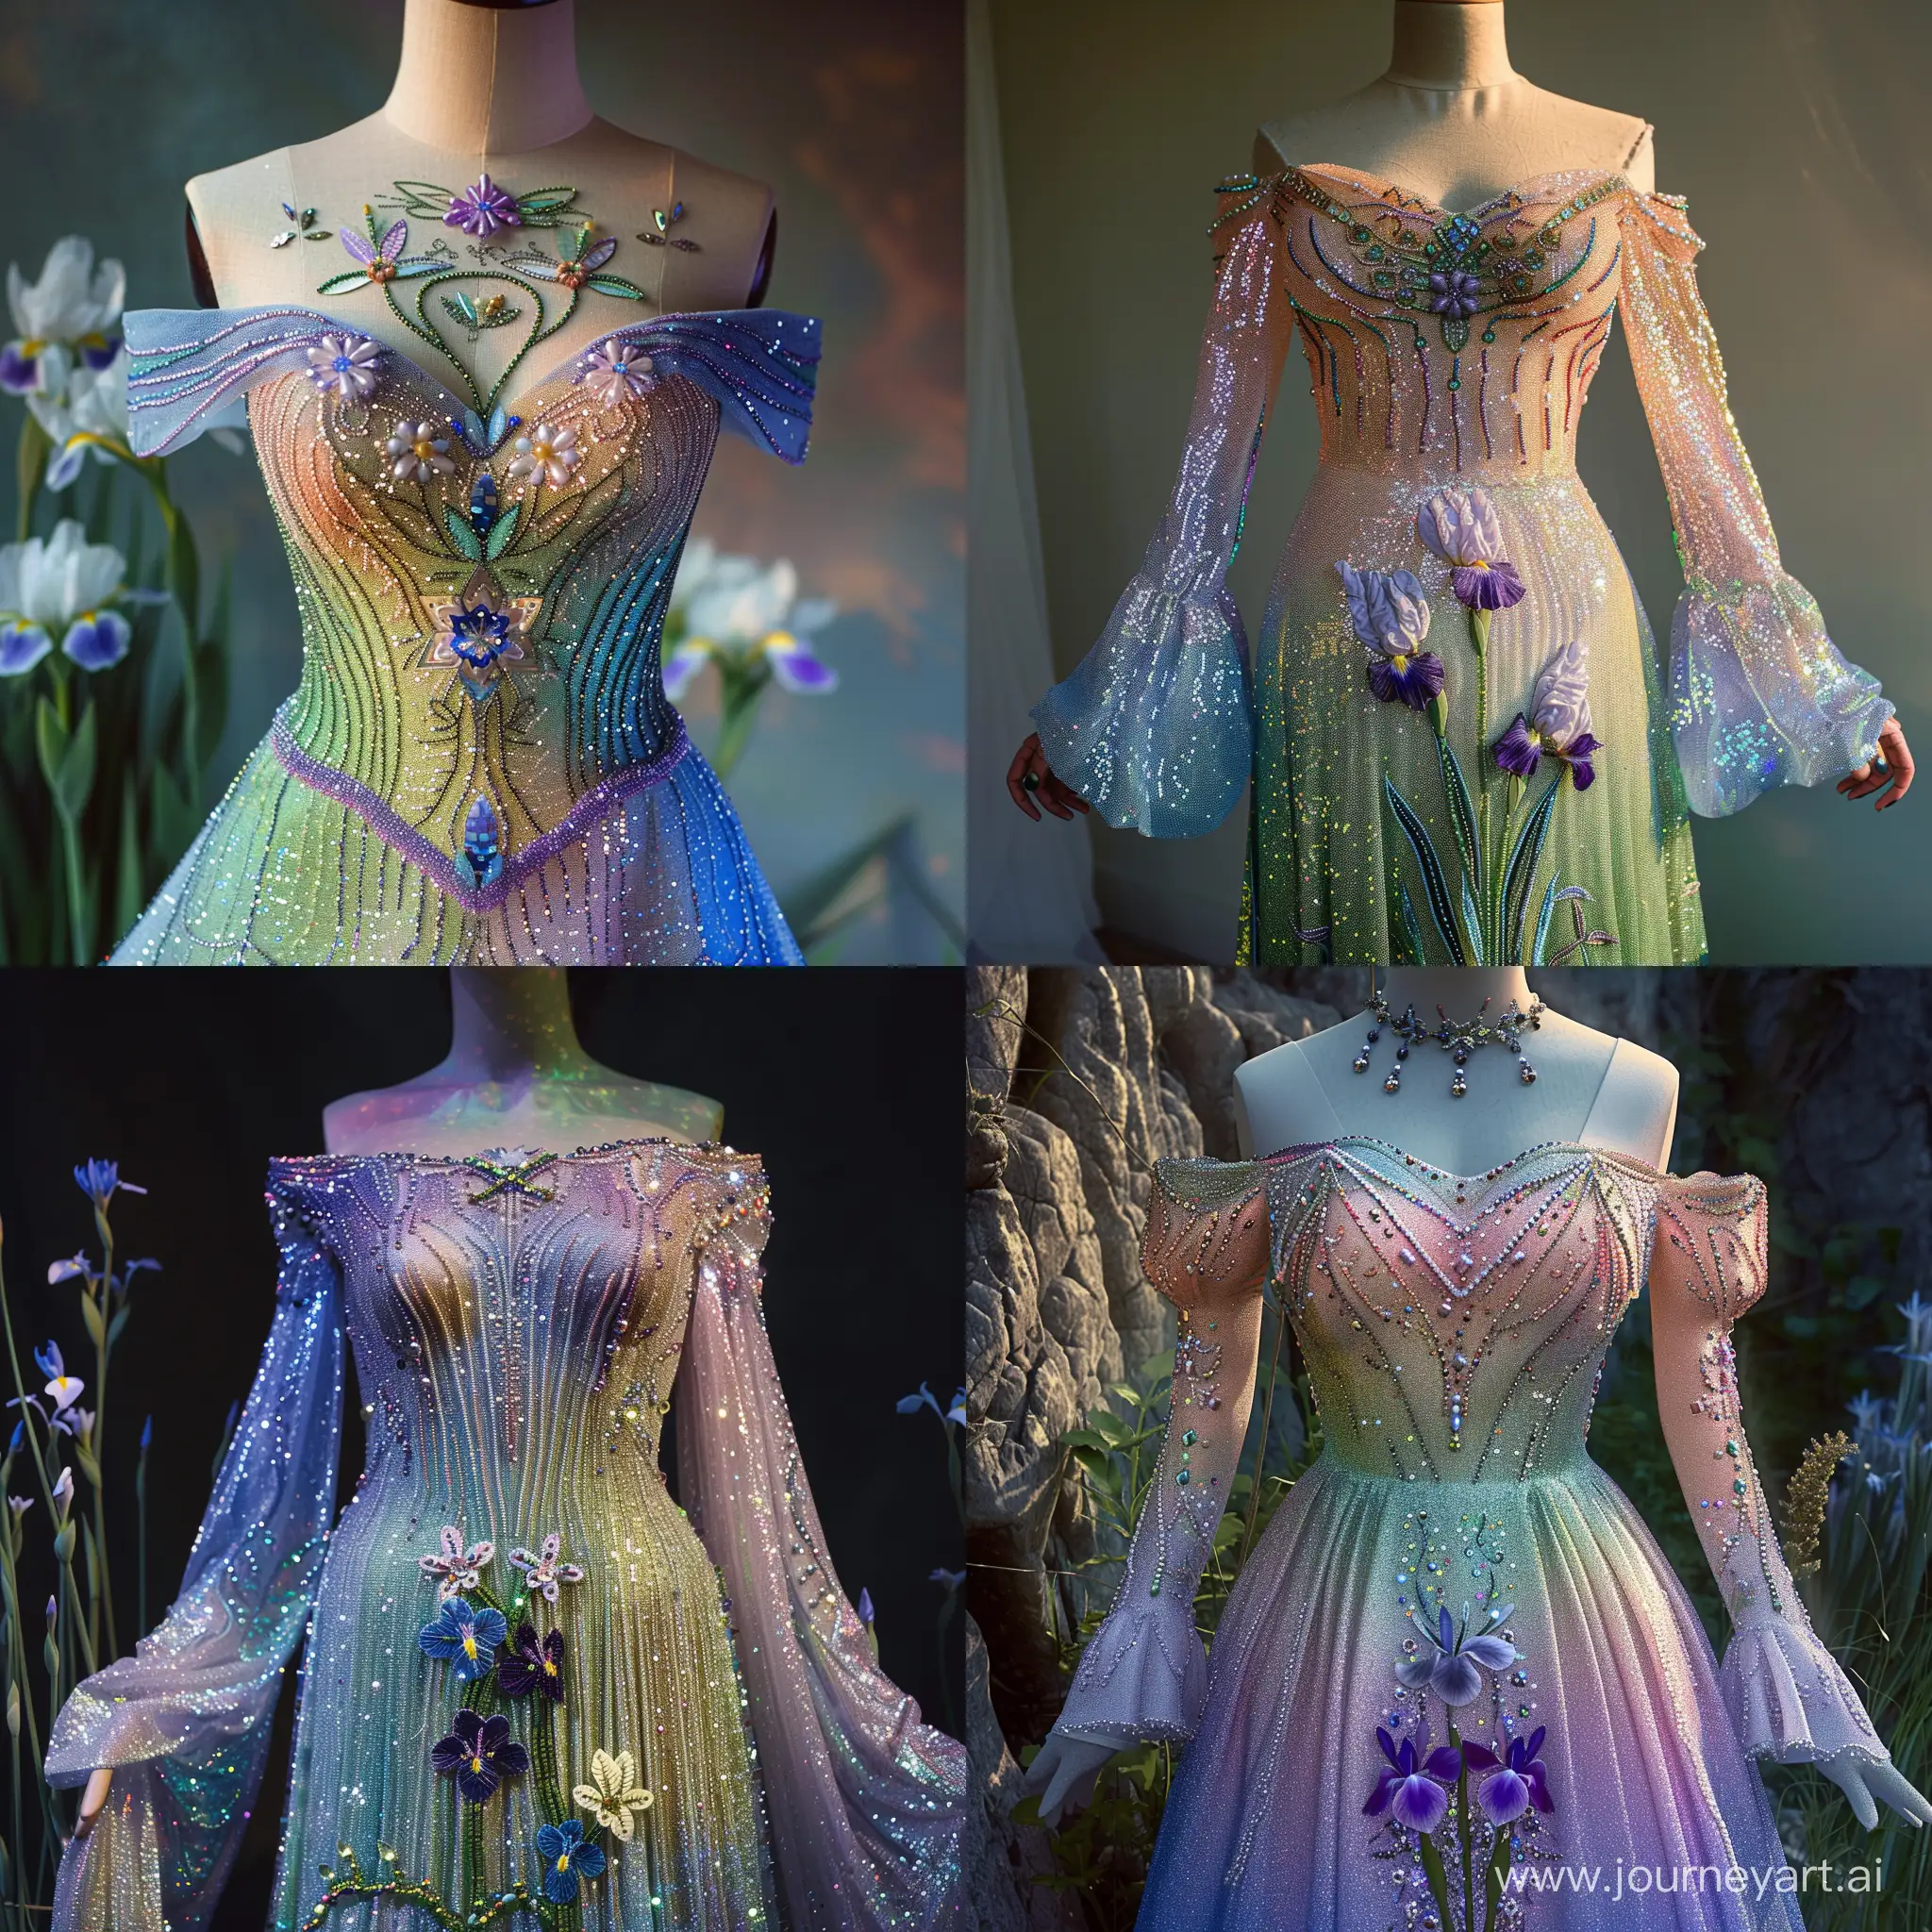 An elfin long off-the-shoulder dress with an iridescent gradient, embroidered with beads resembling the multicolored iridescence of the northern lights and decorated with iris flowers on the chest.